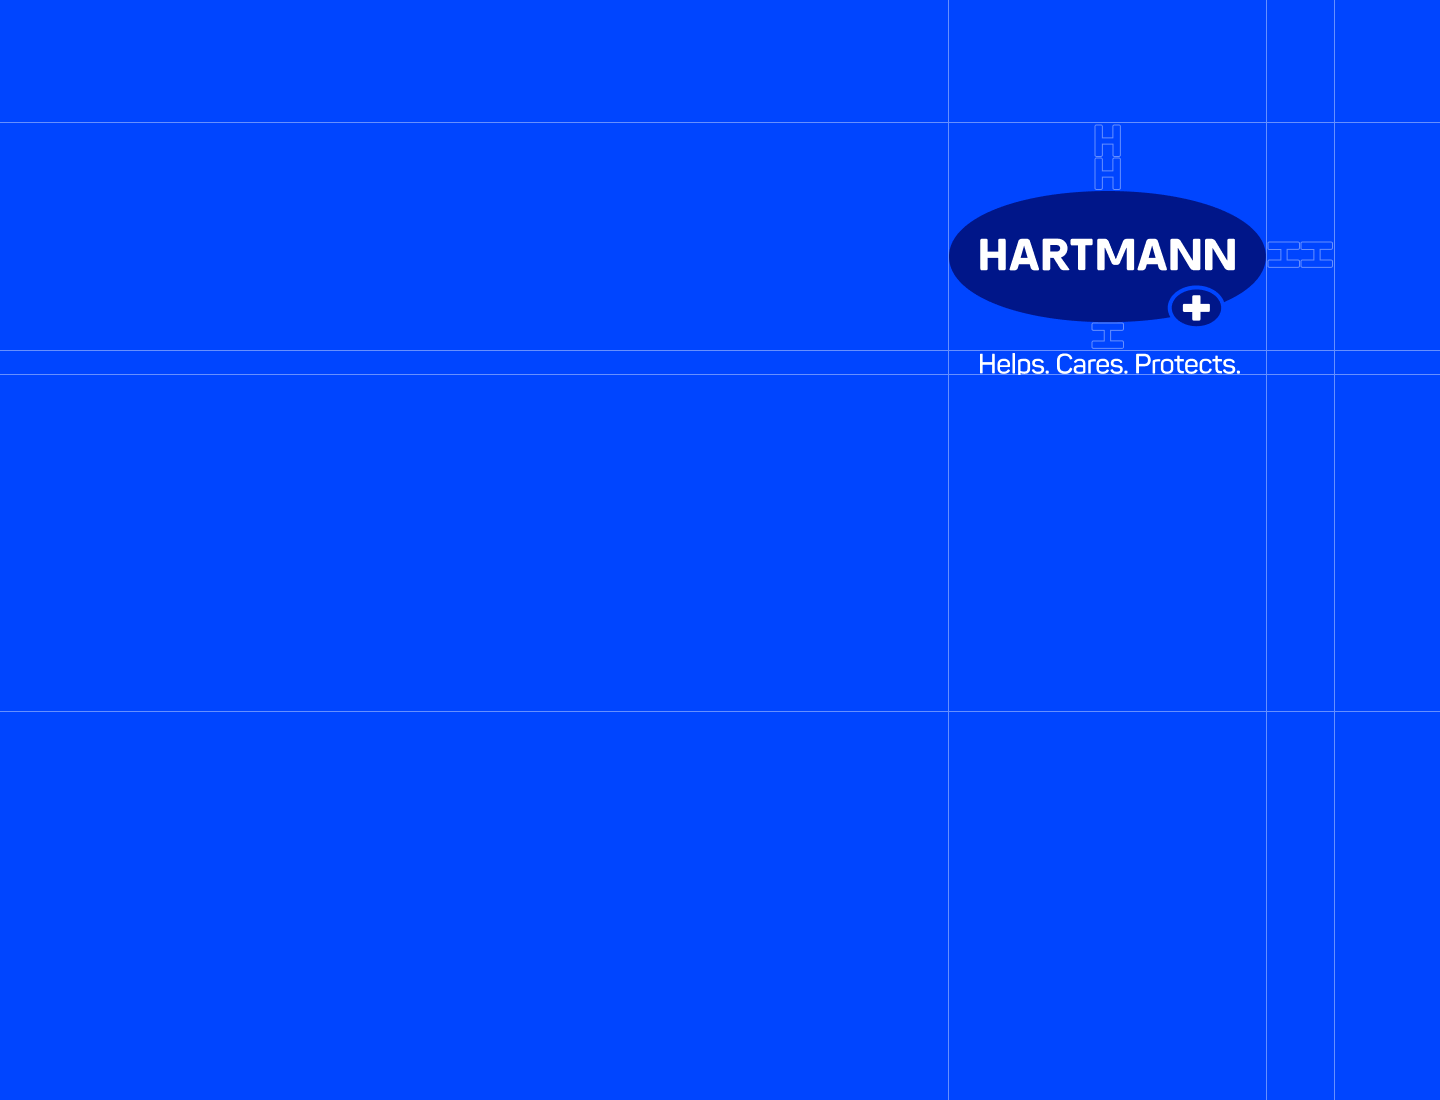 Blue HARTMANN logo with the slogan “Helps. Cares. Protects.”